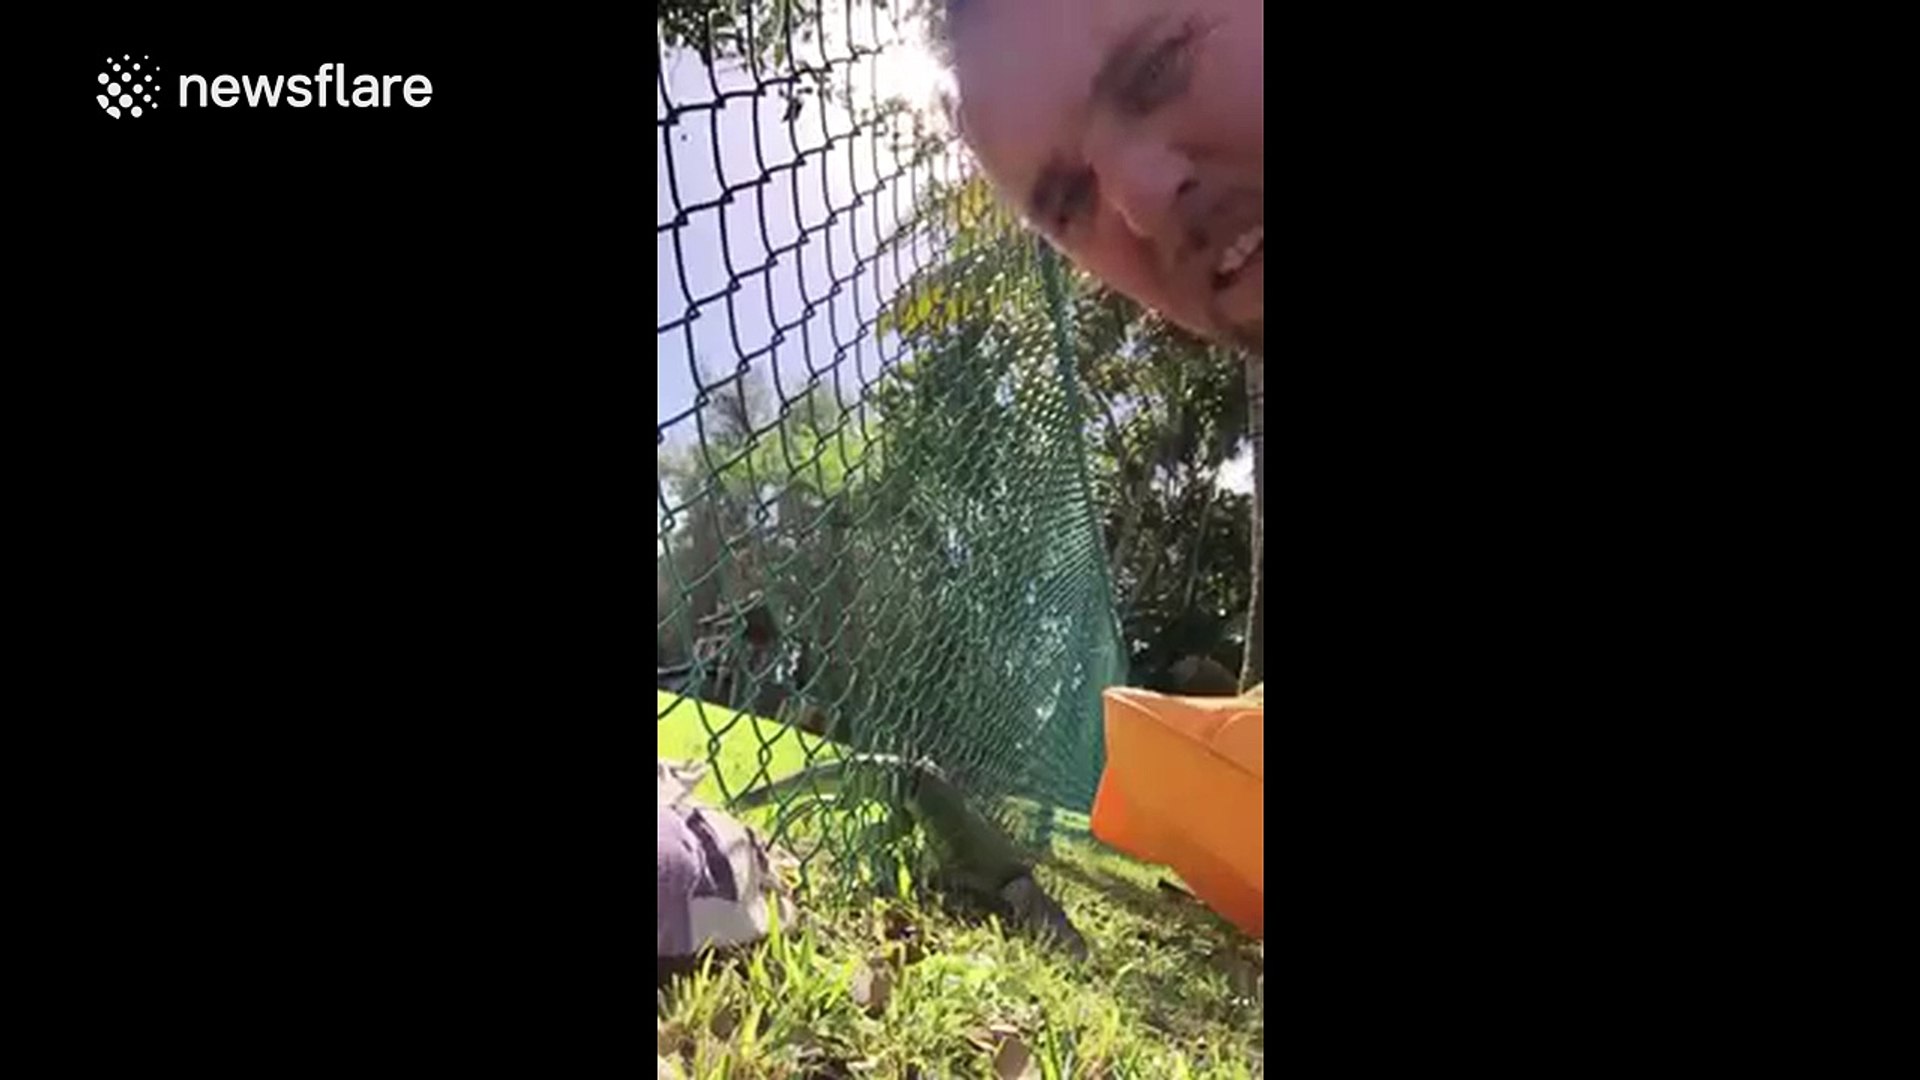 Man saves iguana stuck in a fence